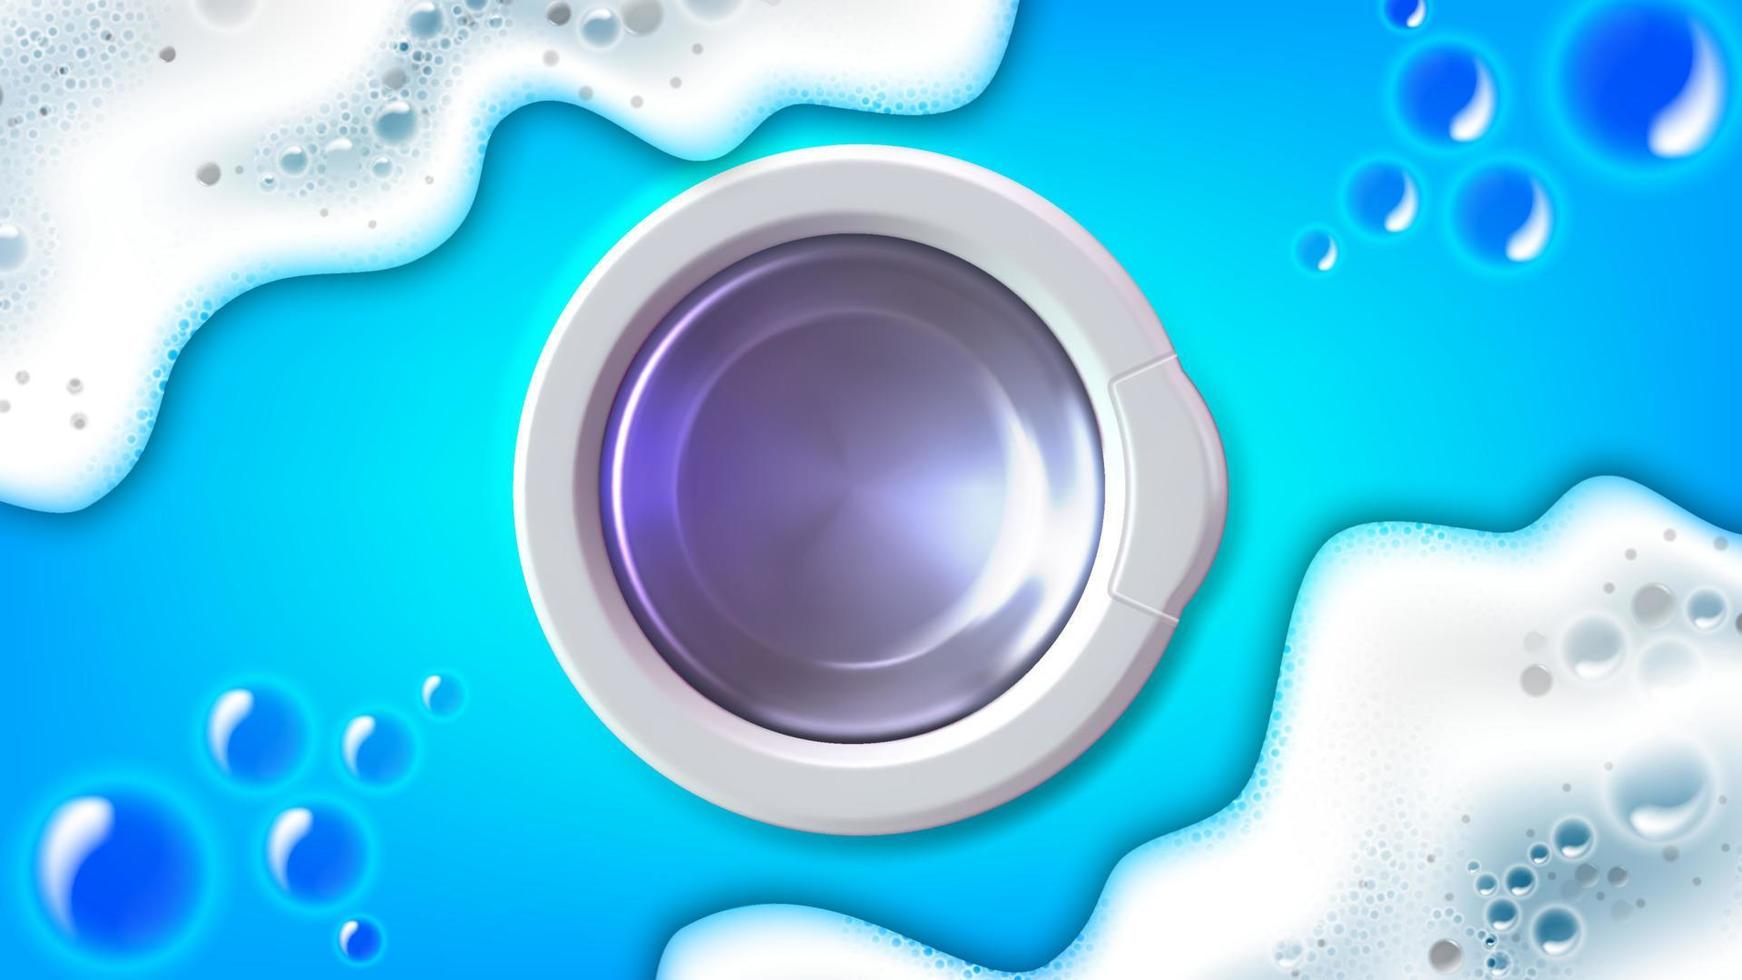 Washing machine door, soap bubbles and foam. Detergent or laundry design. Vector illustration